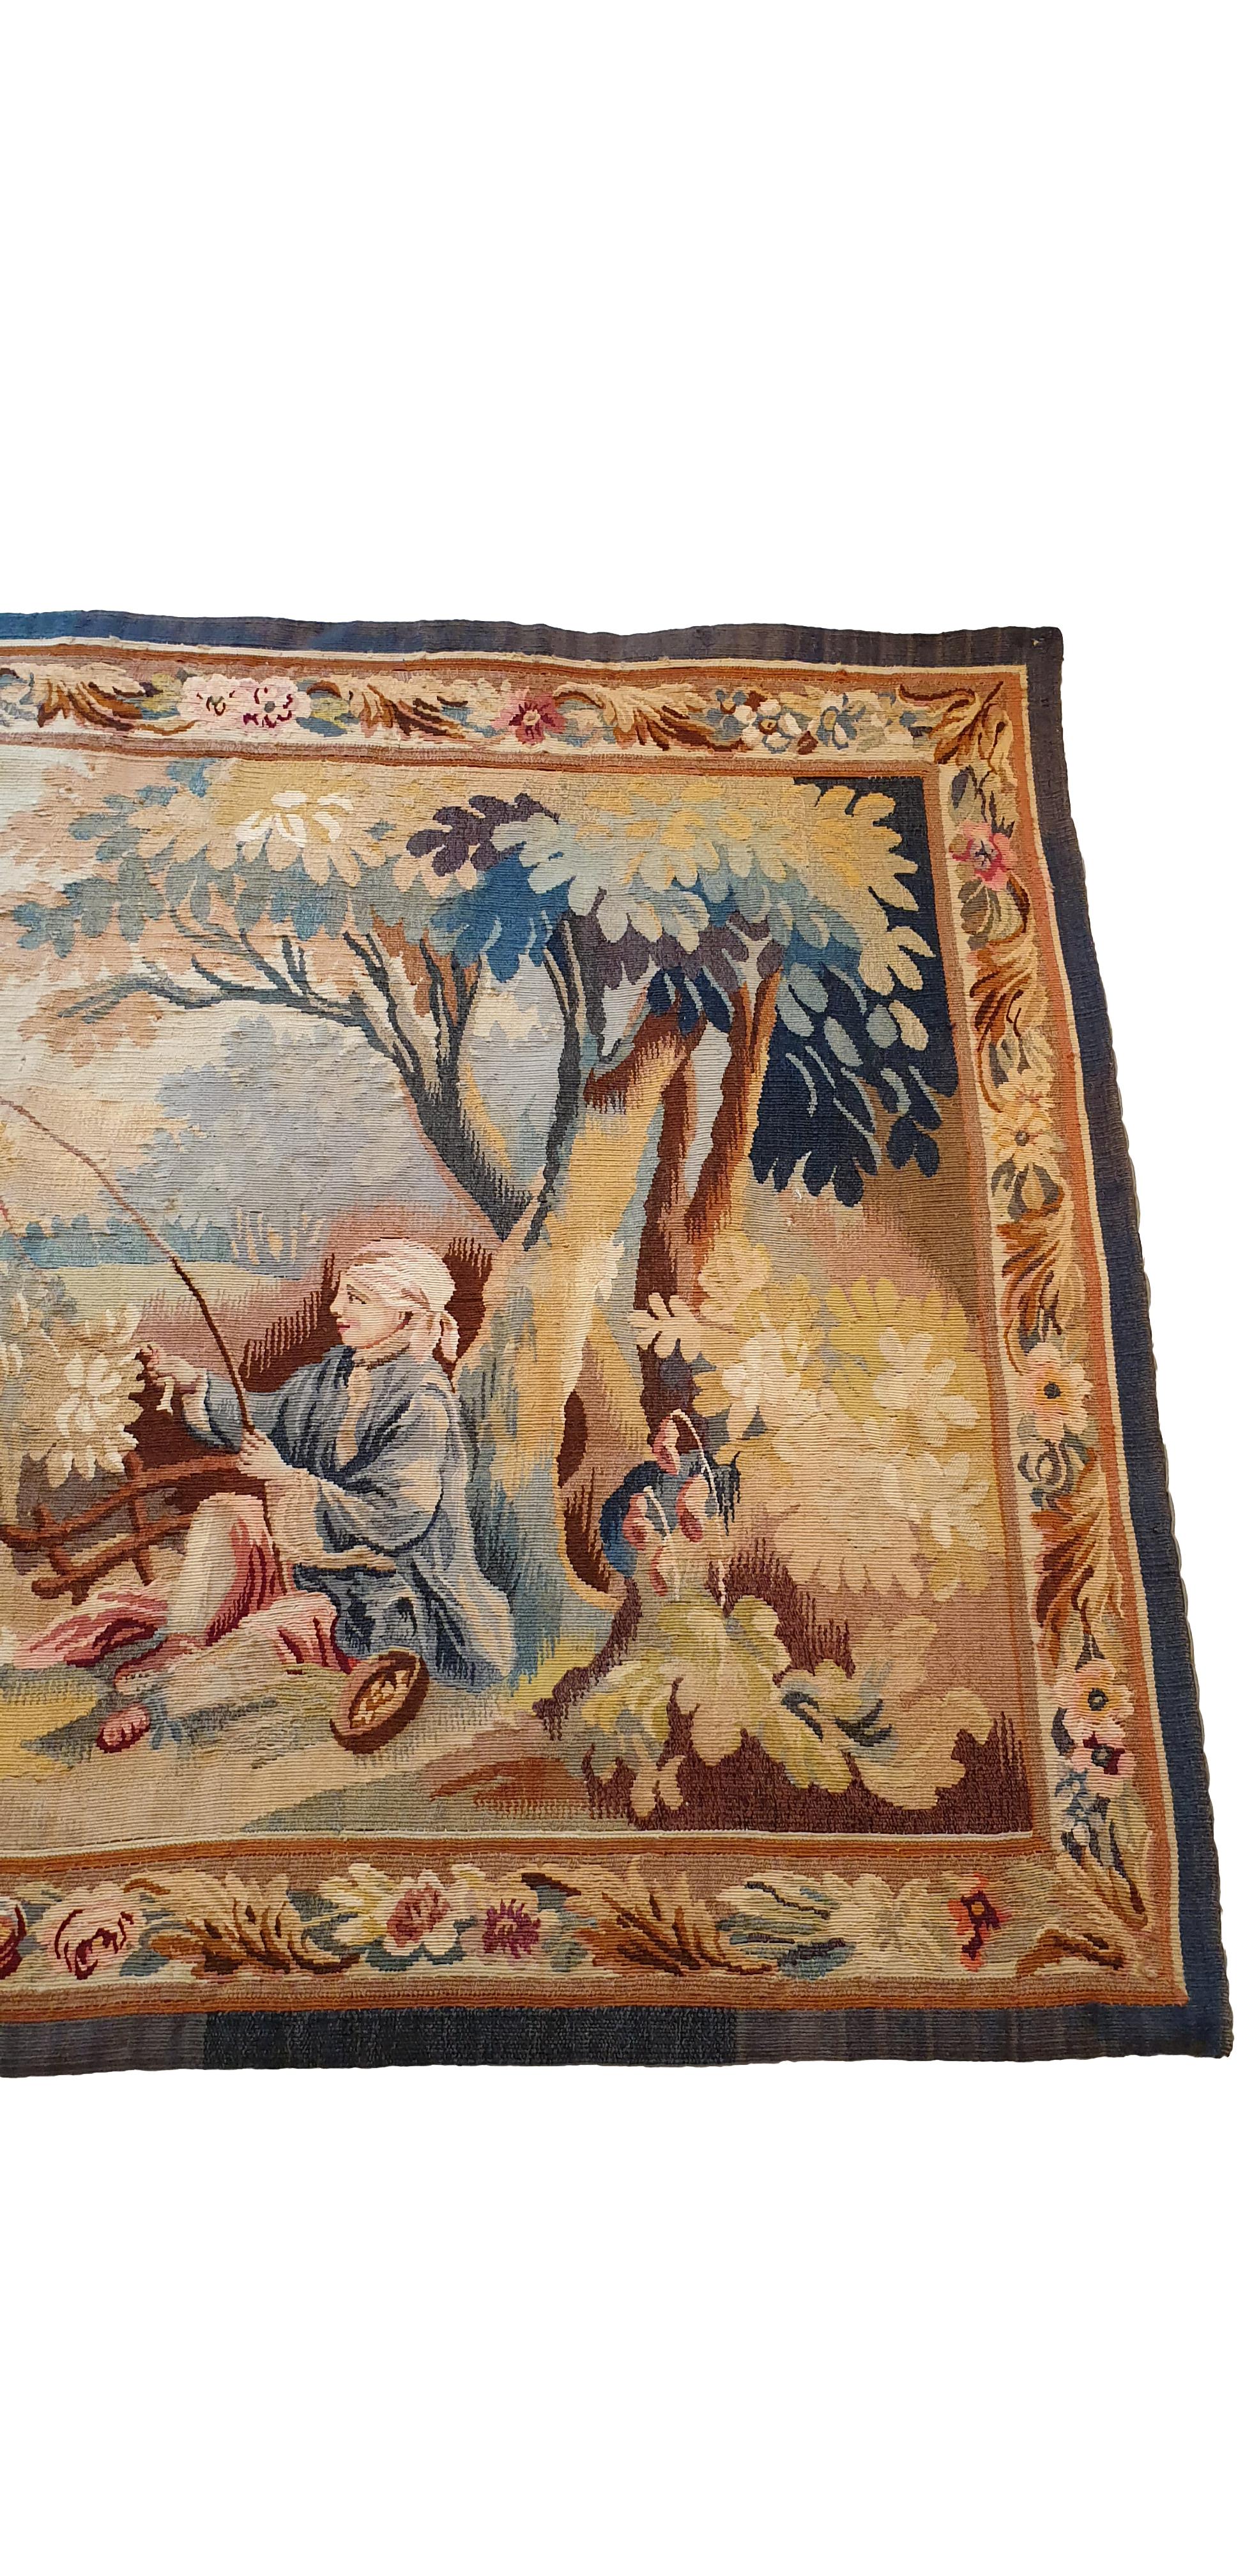 N° 767 - 20th century tapestry Aubusson
in very good general condition and fresh colors 

Measures: 165 x 113 cm.